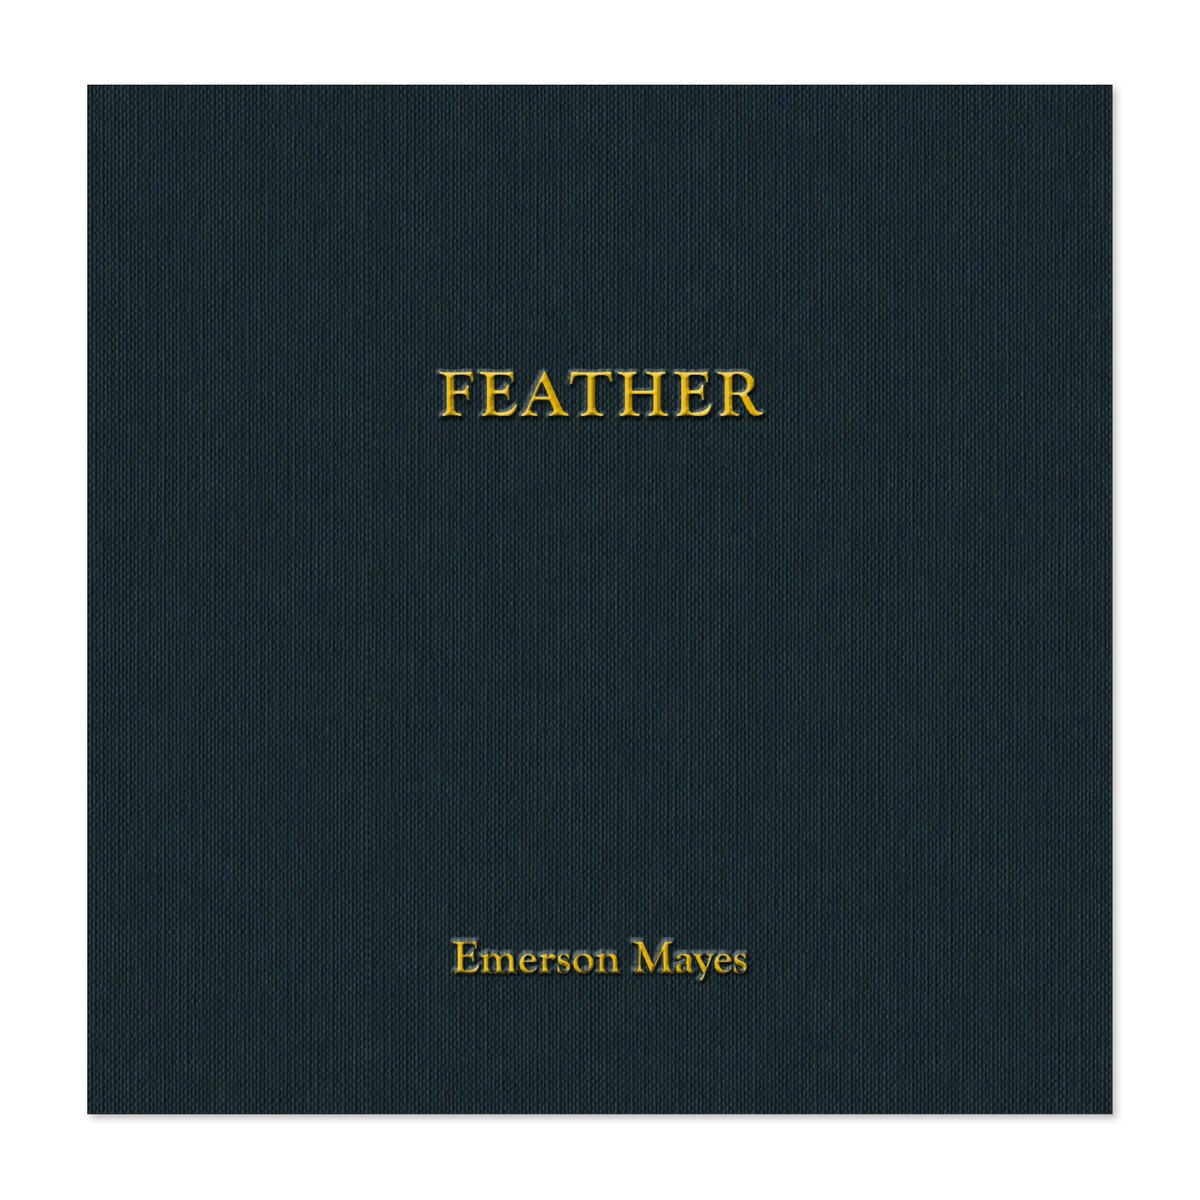 Fans of #monotype, wildlife and the work of Yorkshire artist @e_mpainter can now order 'FEATHER', a brand new 64-page #Norfolk-made collection of highly individual bird images. This most painterly of #printmaking techniques captured in a tiny but lovely 150mm square HB format.